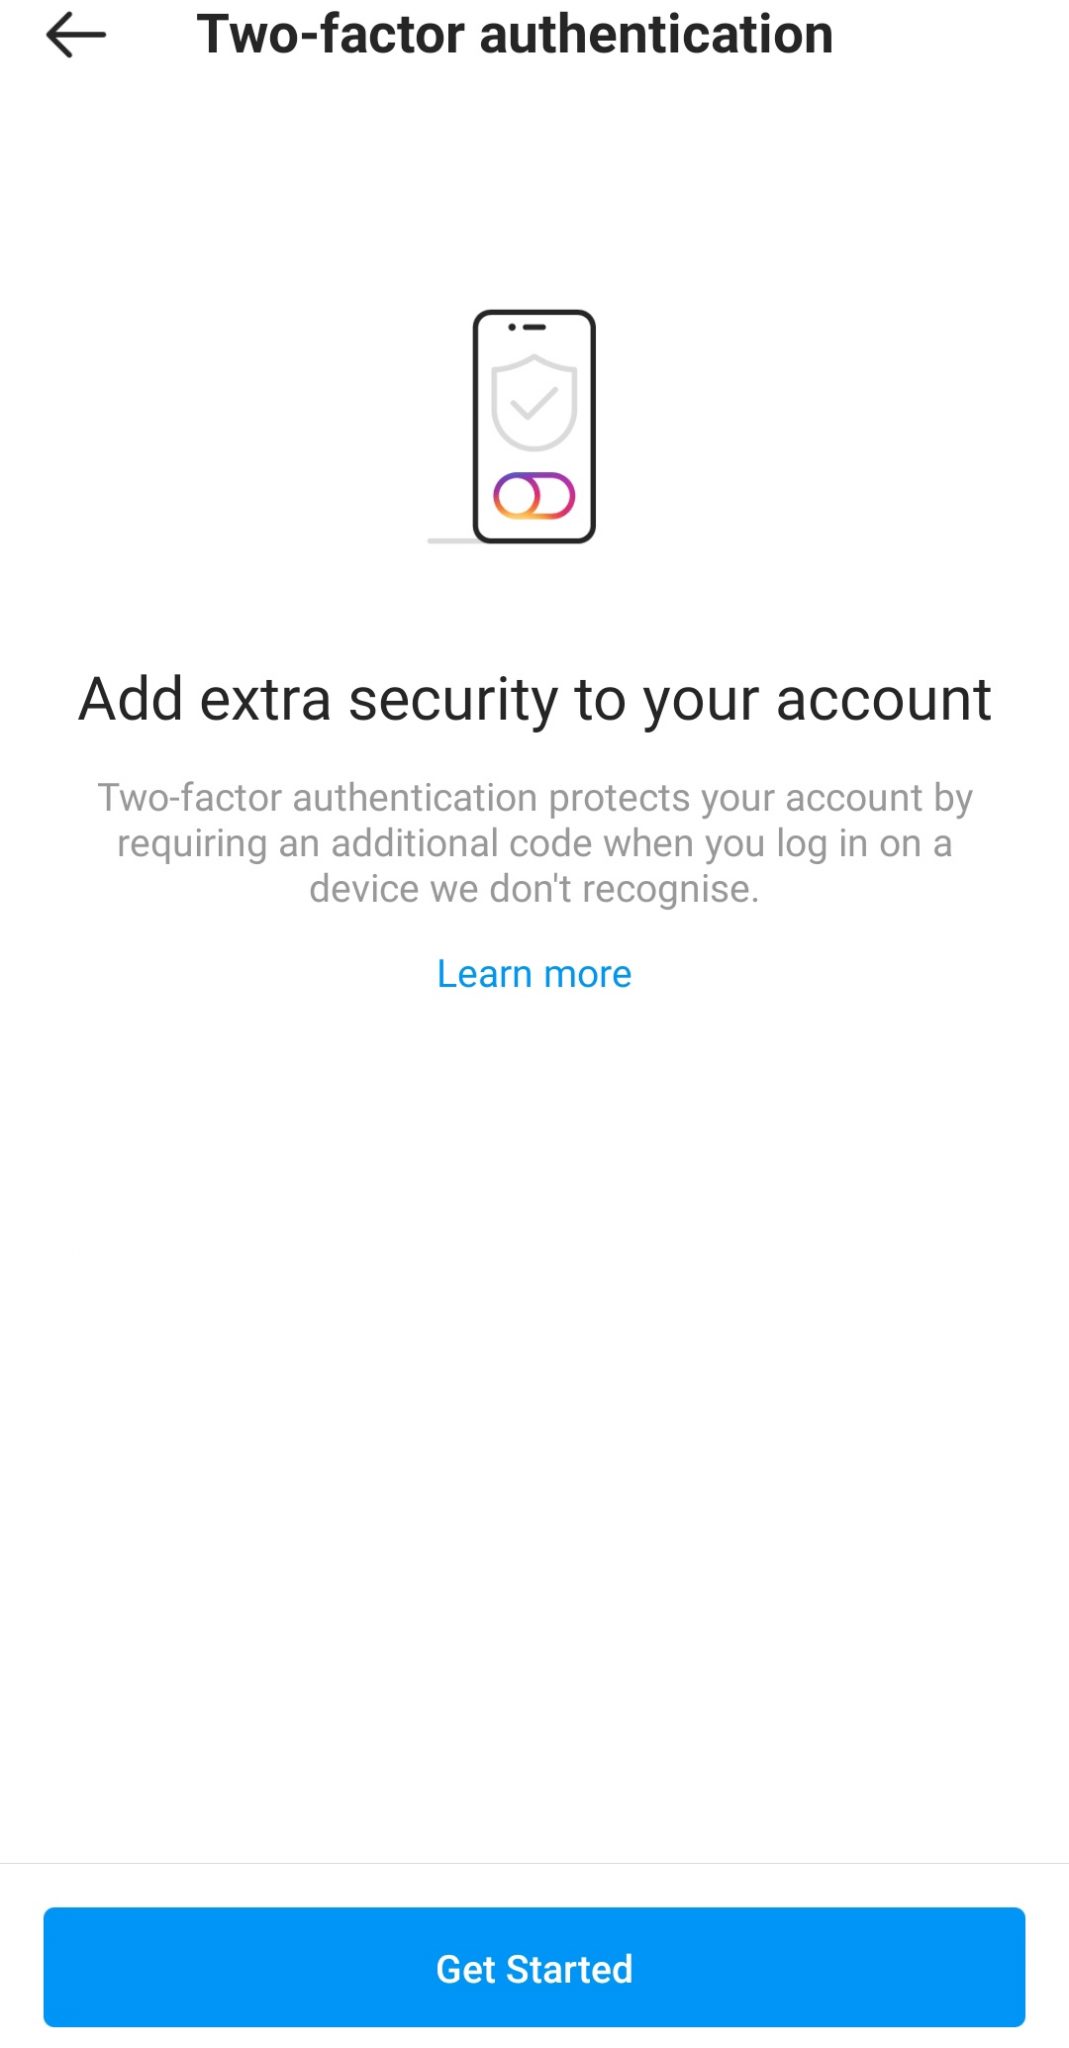 how to reset my instagram password without email and phone number